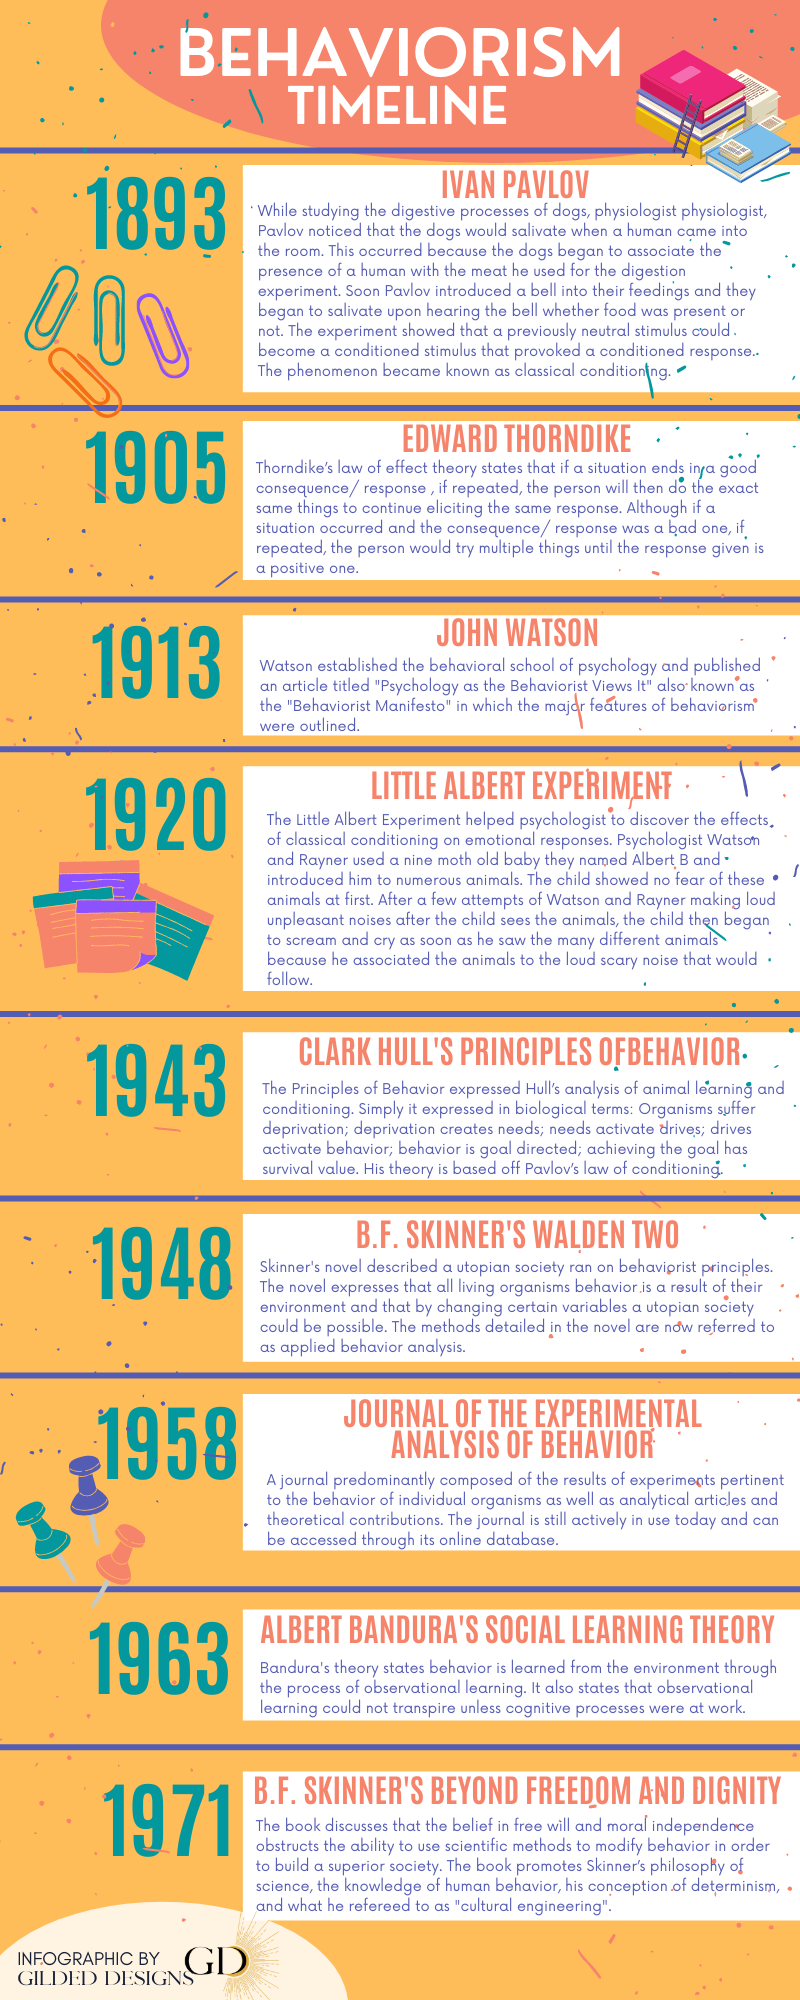 THIS IS and infographic on behaviorism time line